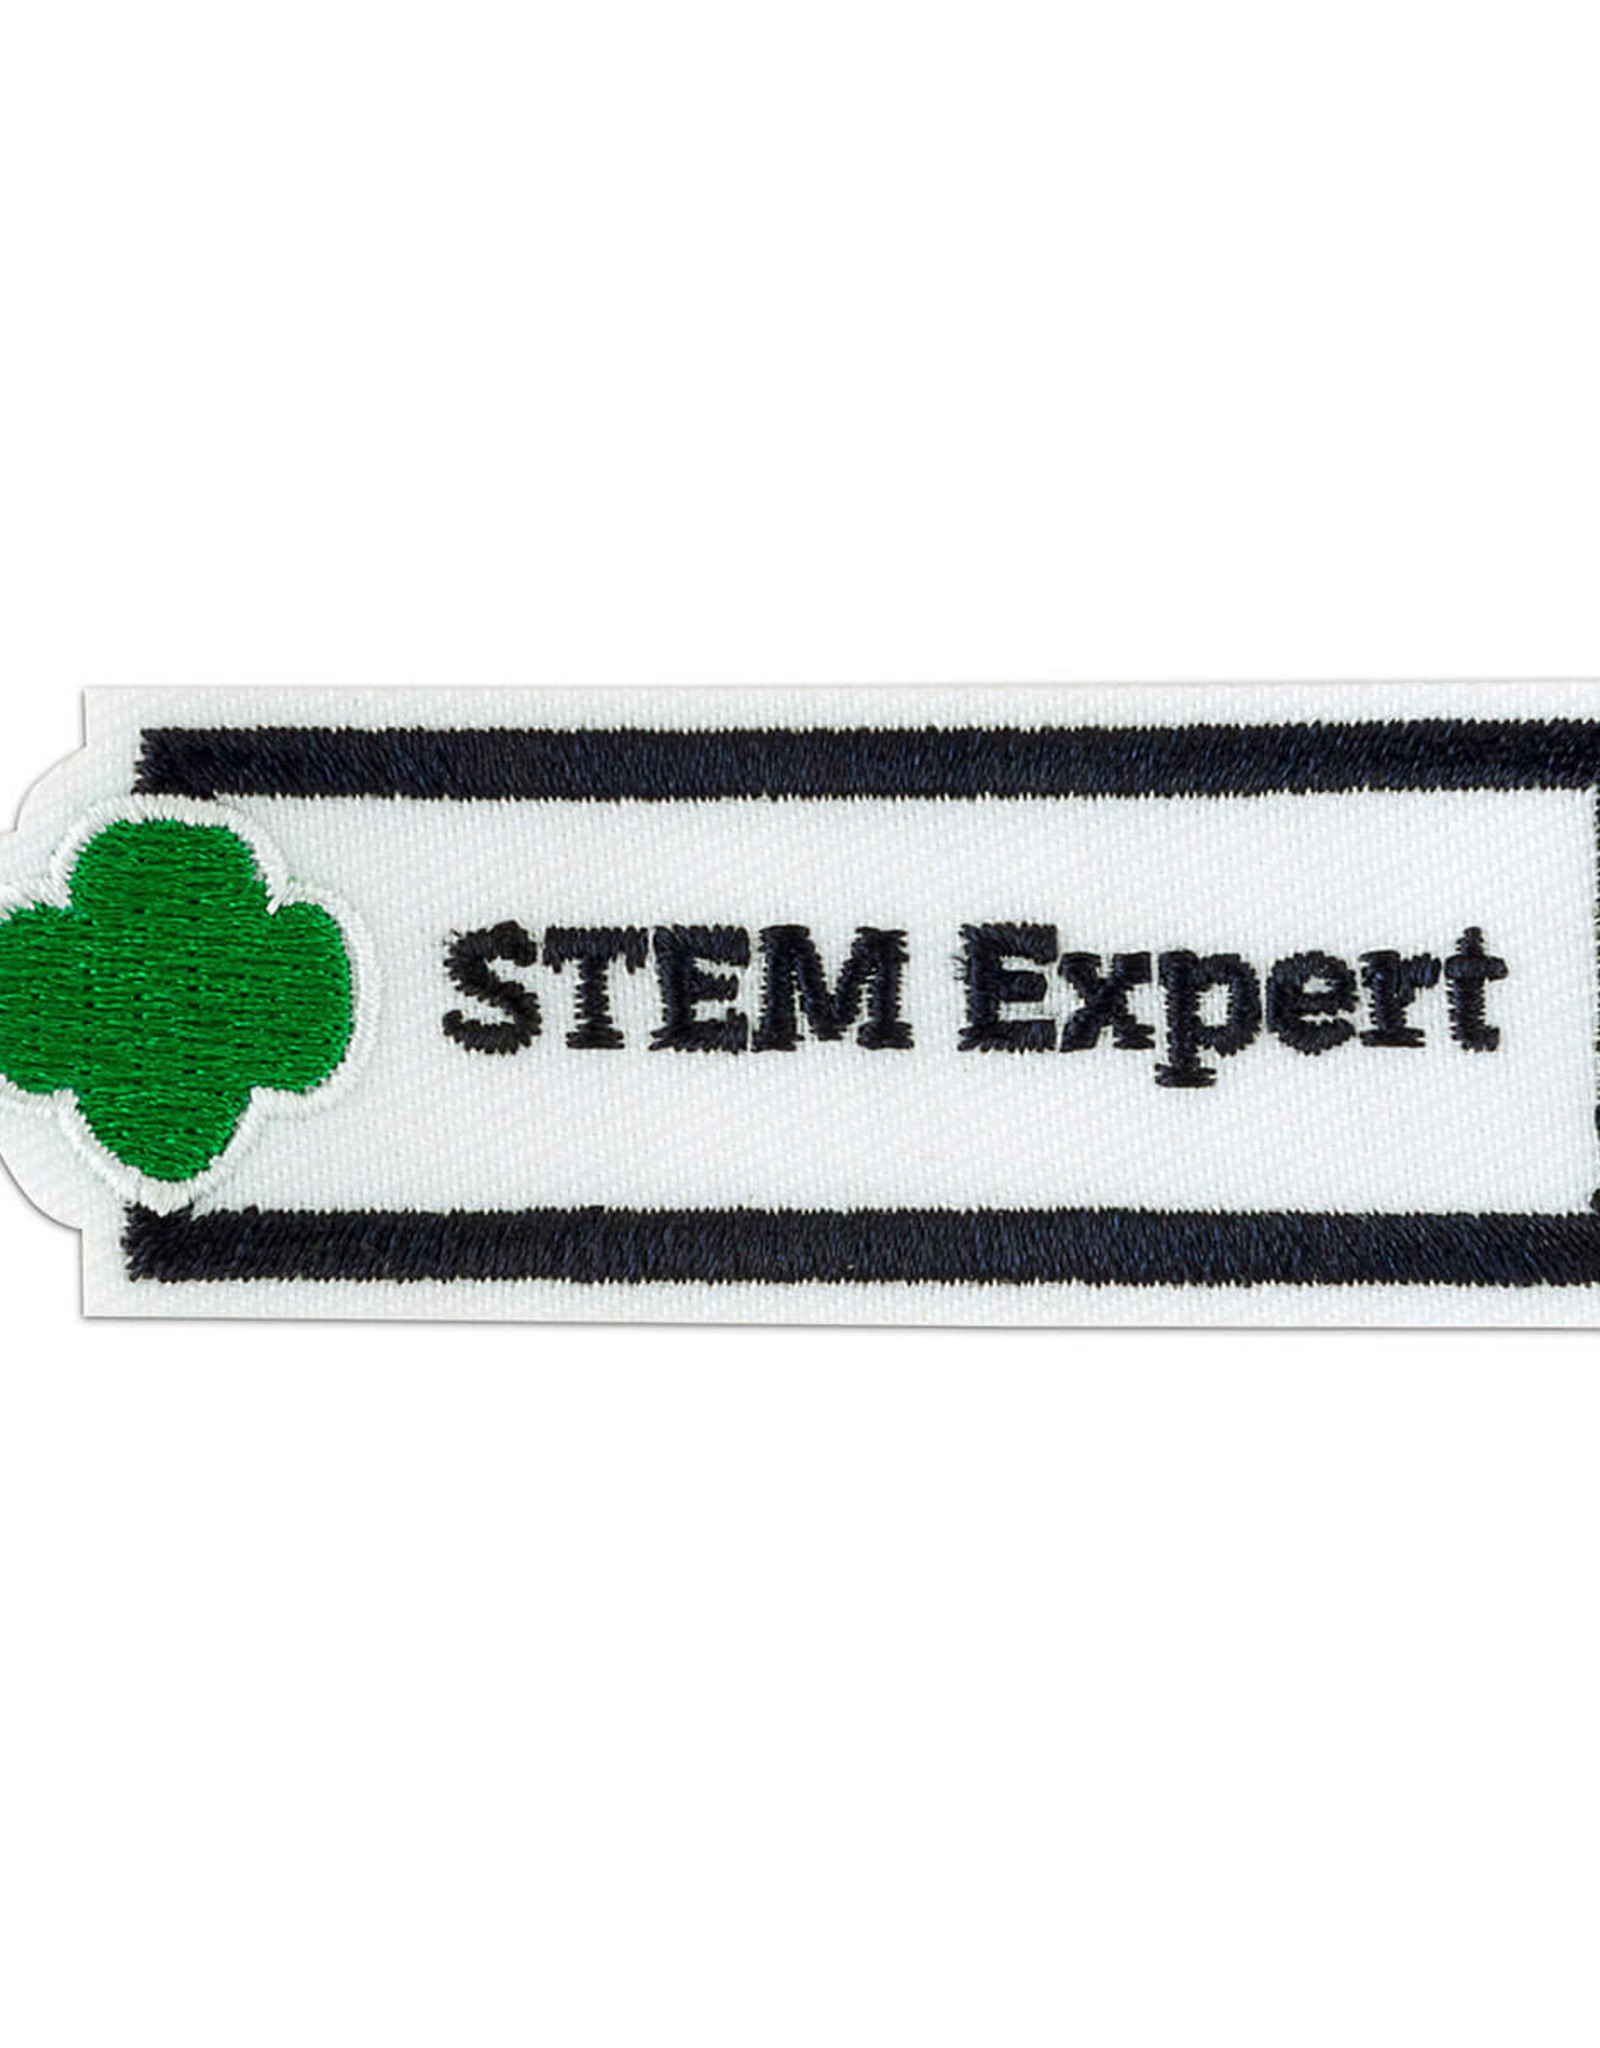 GIRL SCOUTS OF THE USA STEM Expert Adult Achievement Patch